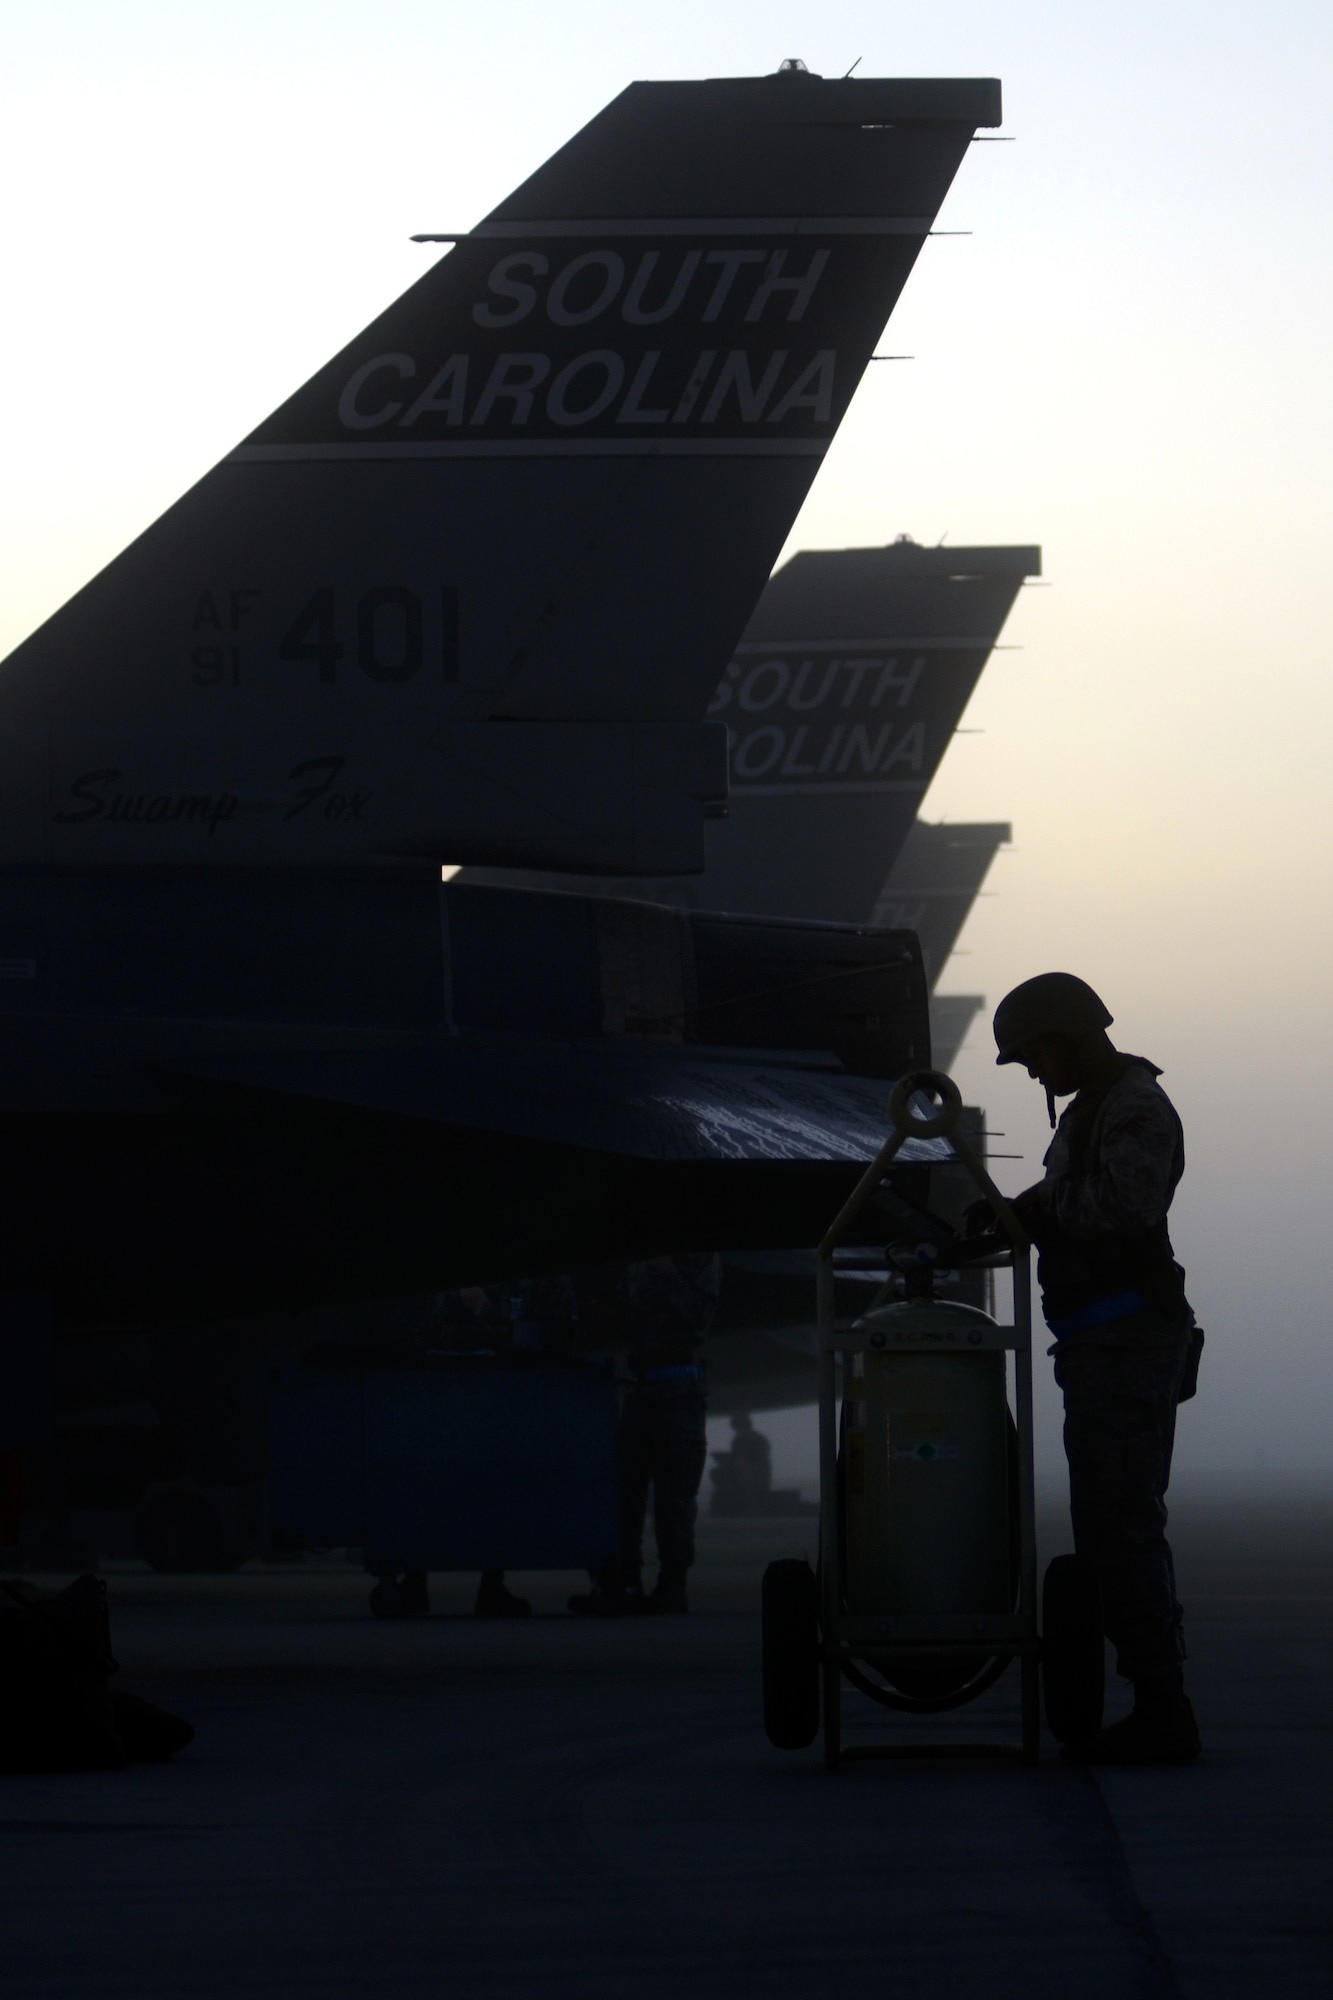 Feature Photograph, 1st Place

U.S. Airmen with the 169th Maintenance Group at McEntire Joint National Guard Base, South Carolina Air National Guard, work to prepare F-16 Fighting Falcon fighter jets for launch during a Phase I Operational Readiness Exercise, Jan. 12, 2013. Members of the 169th Fighter Wing are training for an upcoming Operational Readiness Inspection, which evaluates a unit’s ability to process personnel and equipment from home station to a deployed location safely and efficiently, then operate and launch missions in a chemical combat environment. (U.S. Air National Guard photo by Tech. Sgt. Caycee Watson/Released)